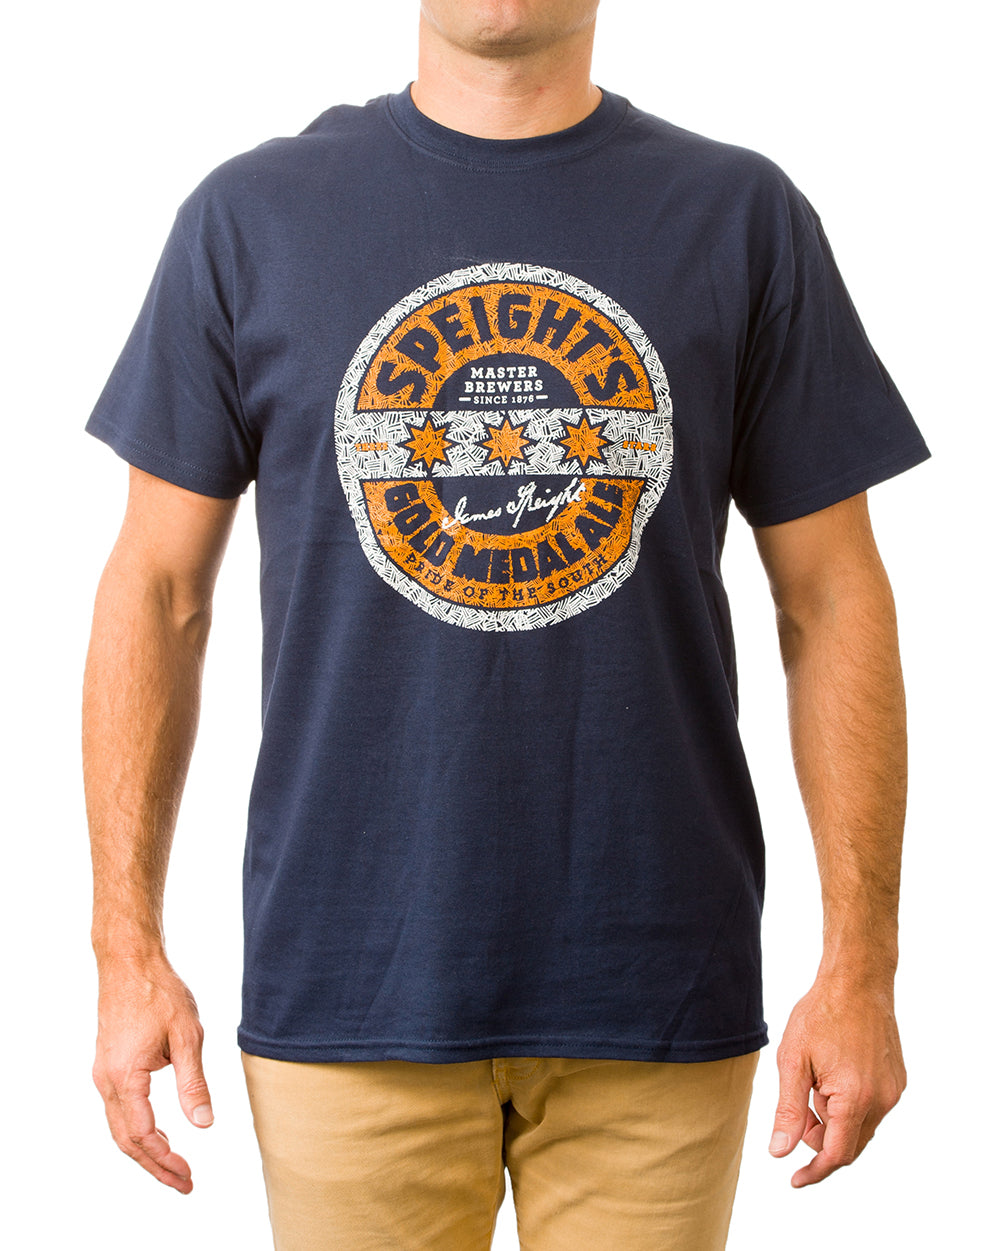 Speight's Stitch Tee -  Beer Gear Apparel & Merchandise - Speights - Lion Red - VB - Tokyo Dy merch